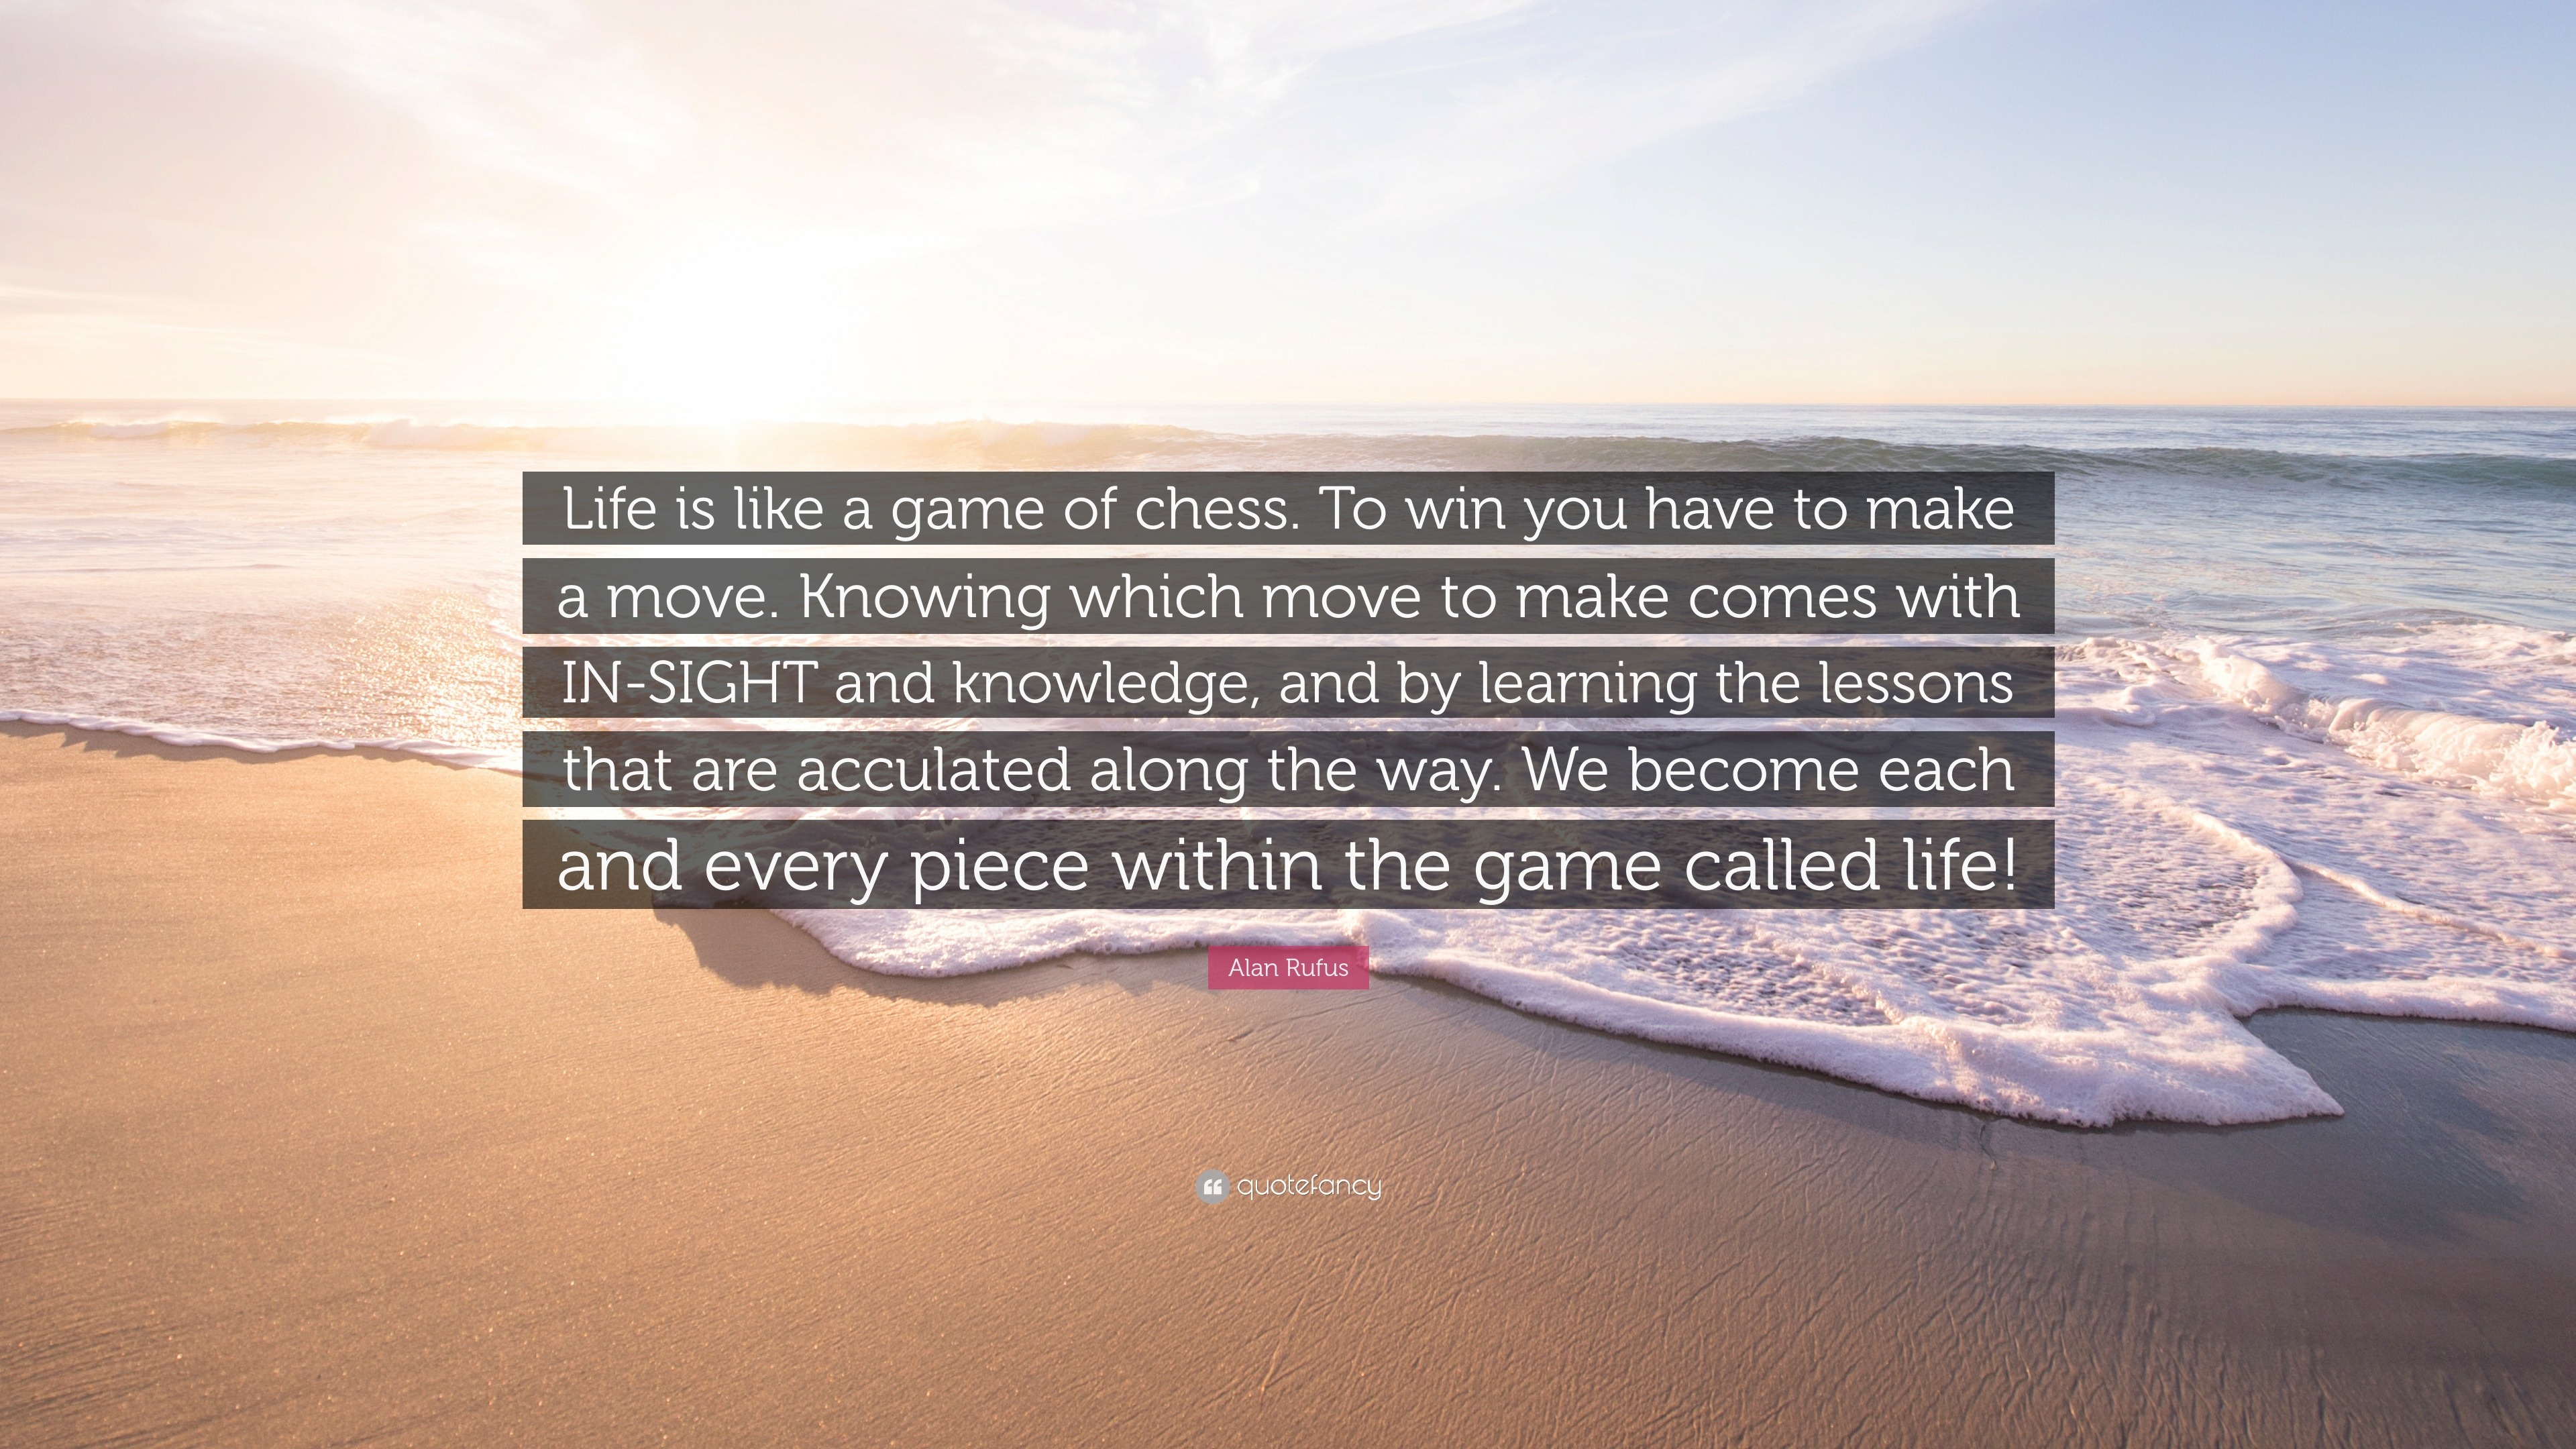 life quotes: Simply put life is a game of chess. #lifequotes #amazing #life  #quotes